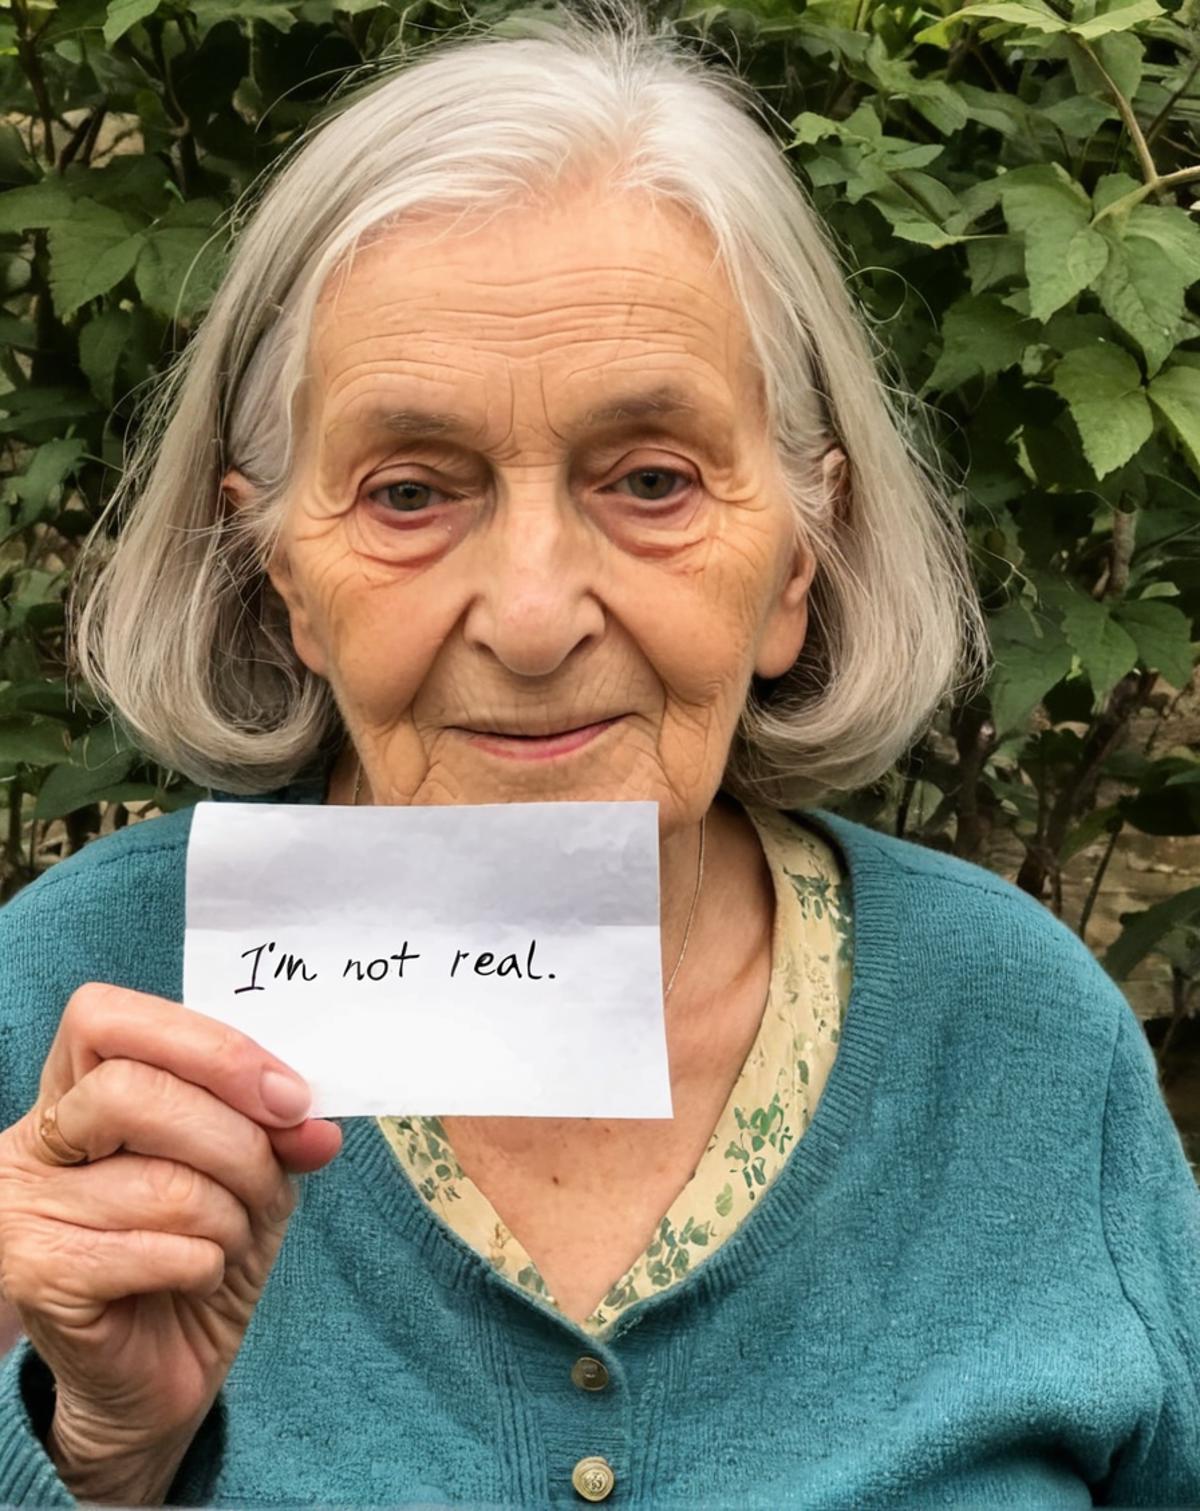 An elderly woman holding a piece of paper that says "I'm not real".